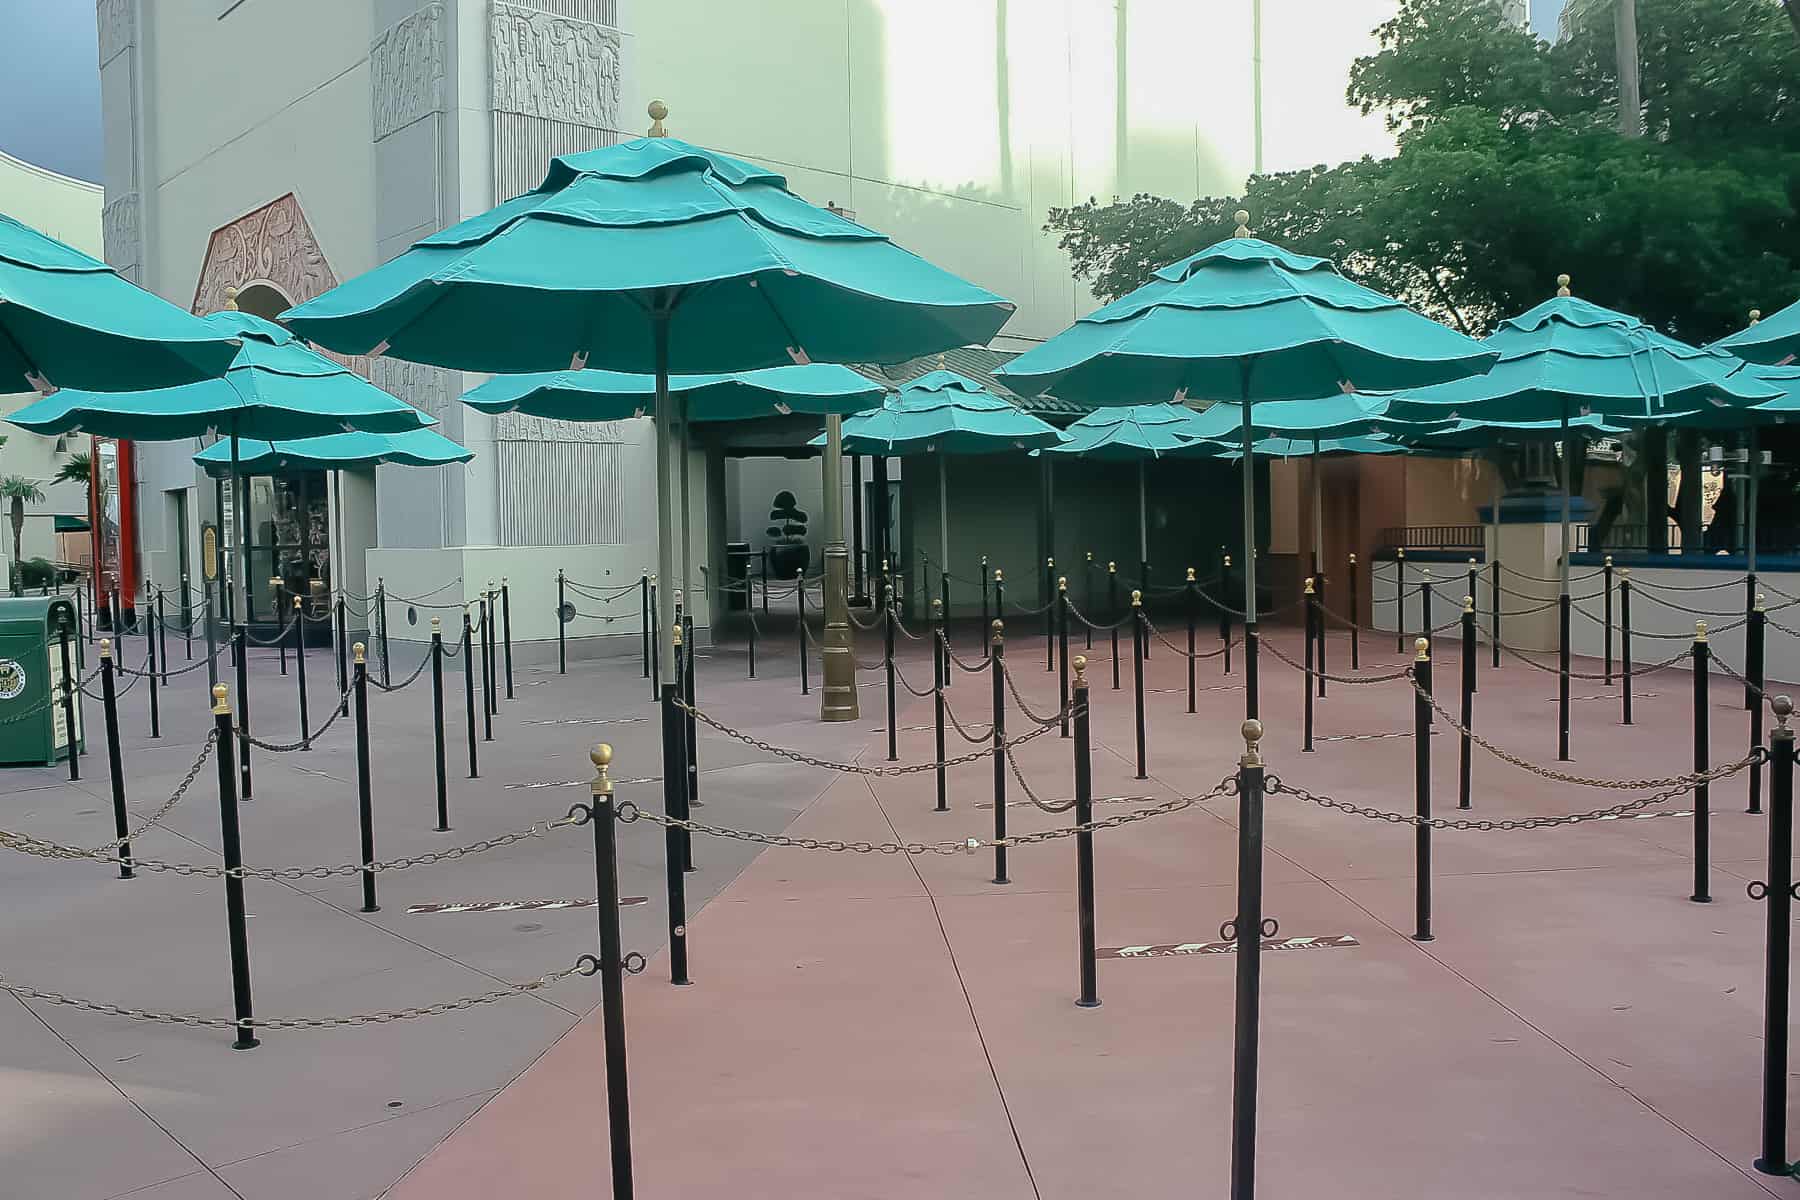 exterior portion of the queue with green umbrellas and chain ropes 